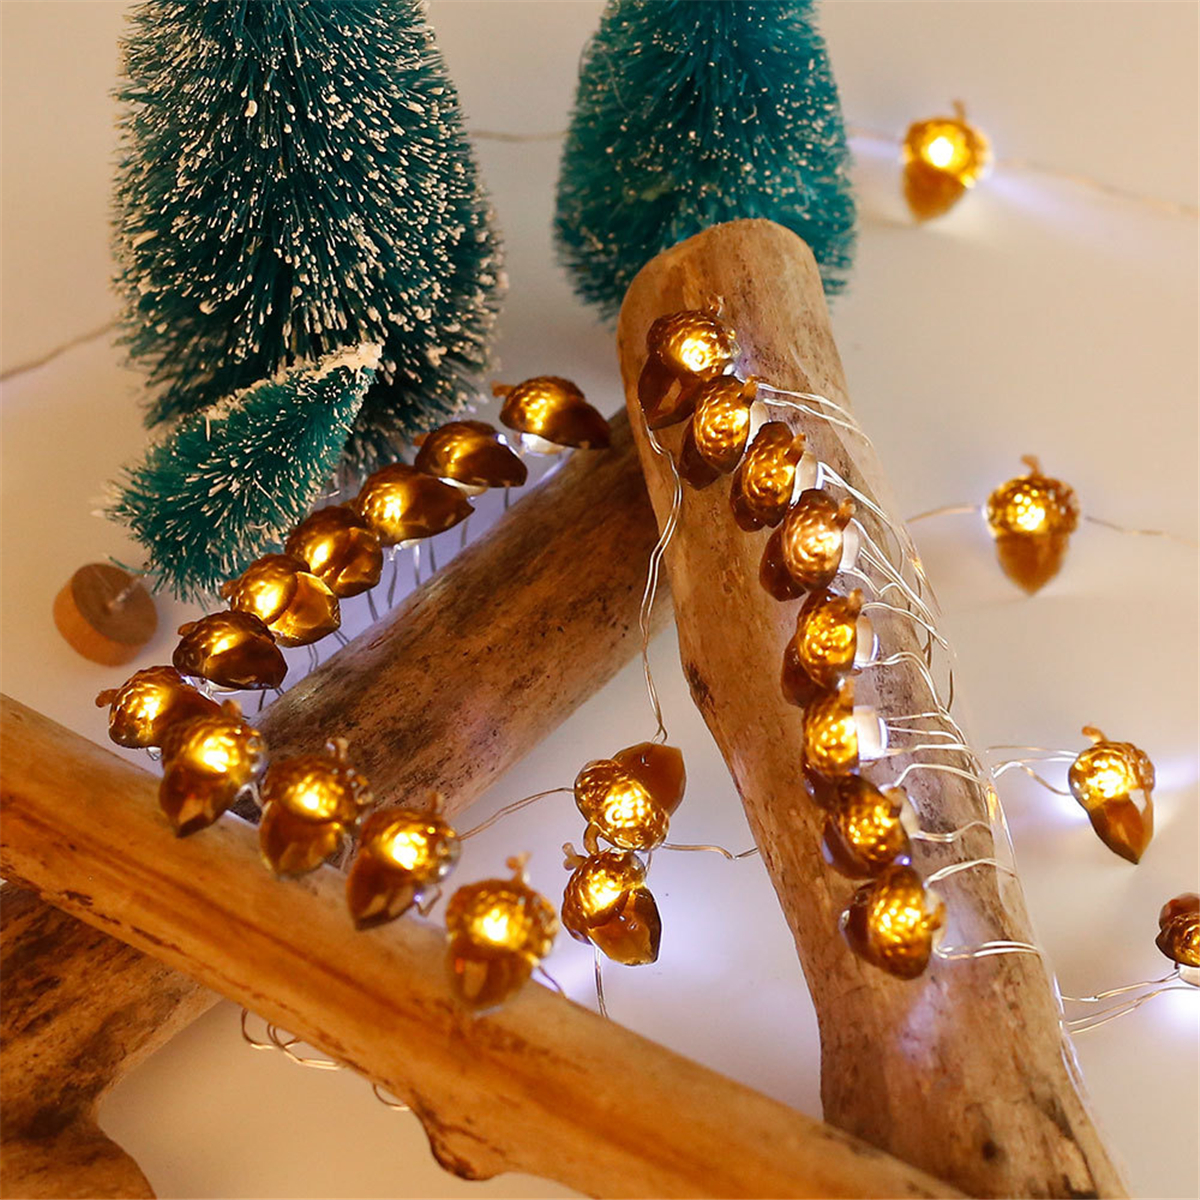 Find 2M 3M 4M Acorn Pine Cones LED String Light Fairy Lamp with Remote Control Patio Yard Garden Christmas Decor for Sale on Gipsybee.com with cryptocurrencies